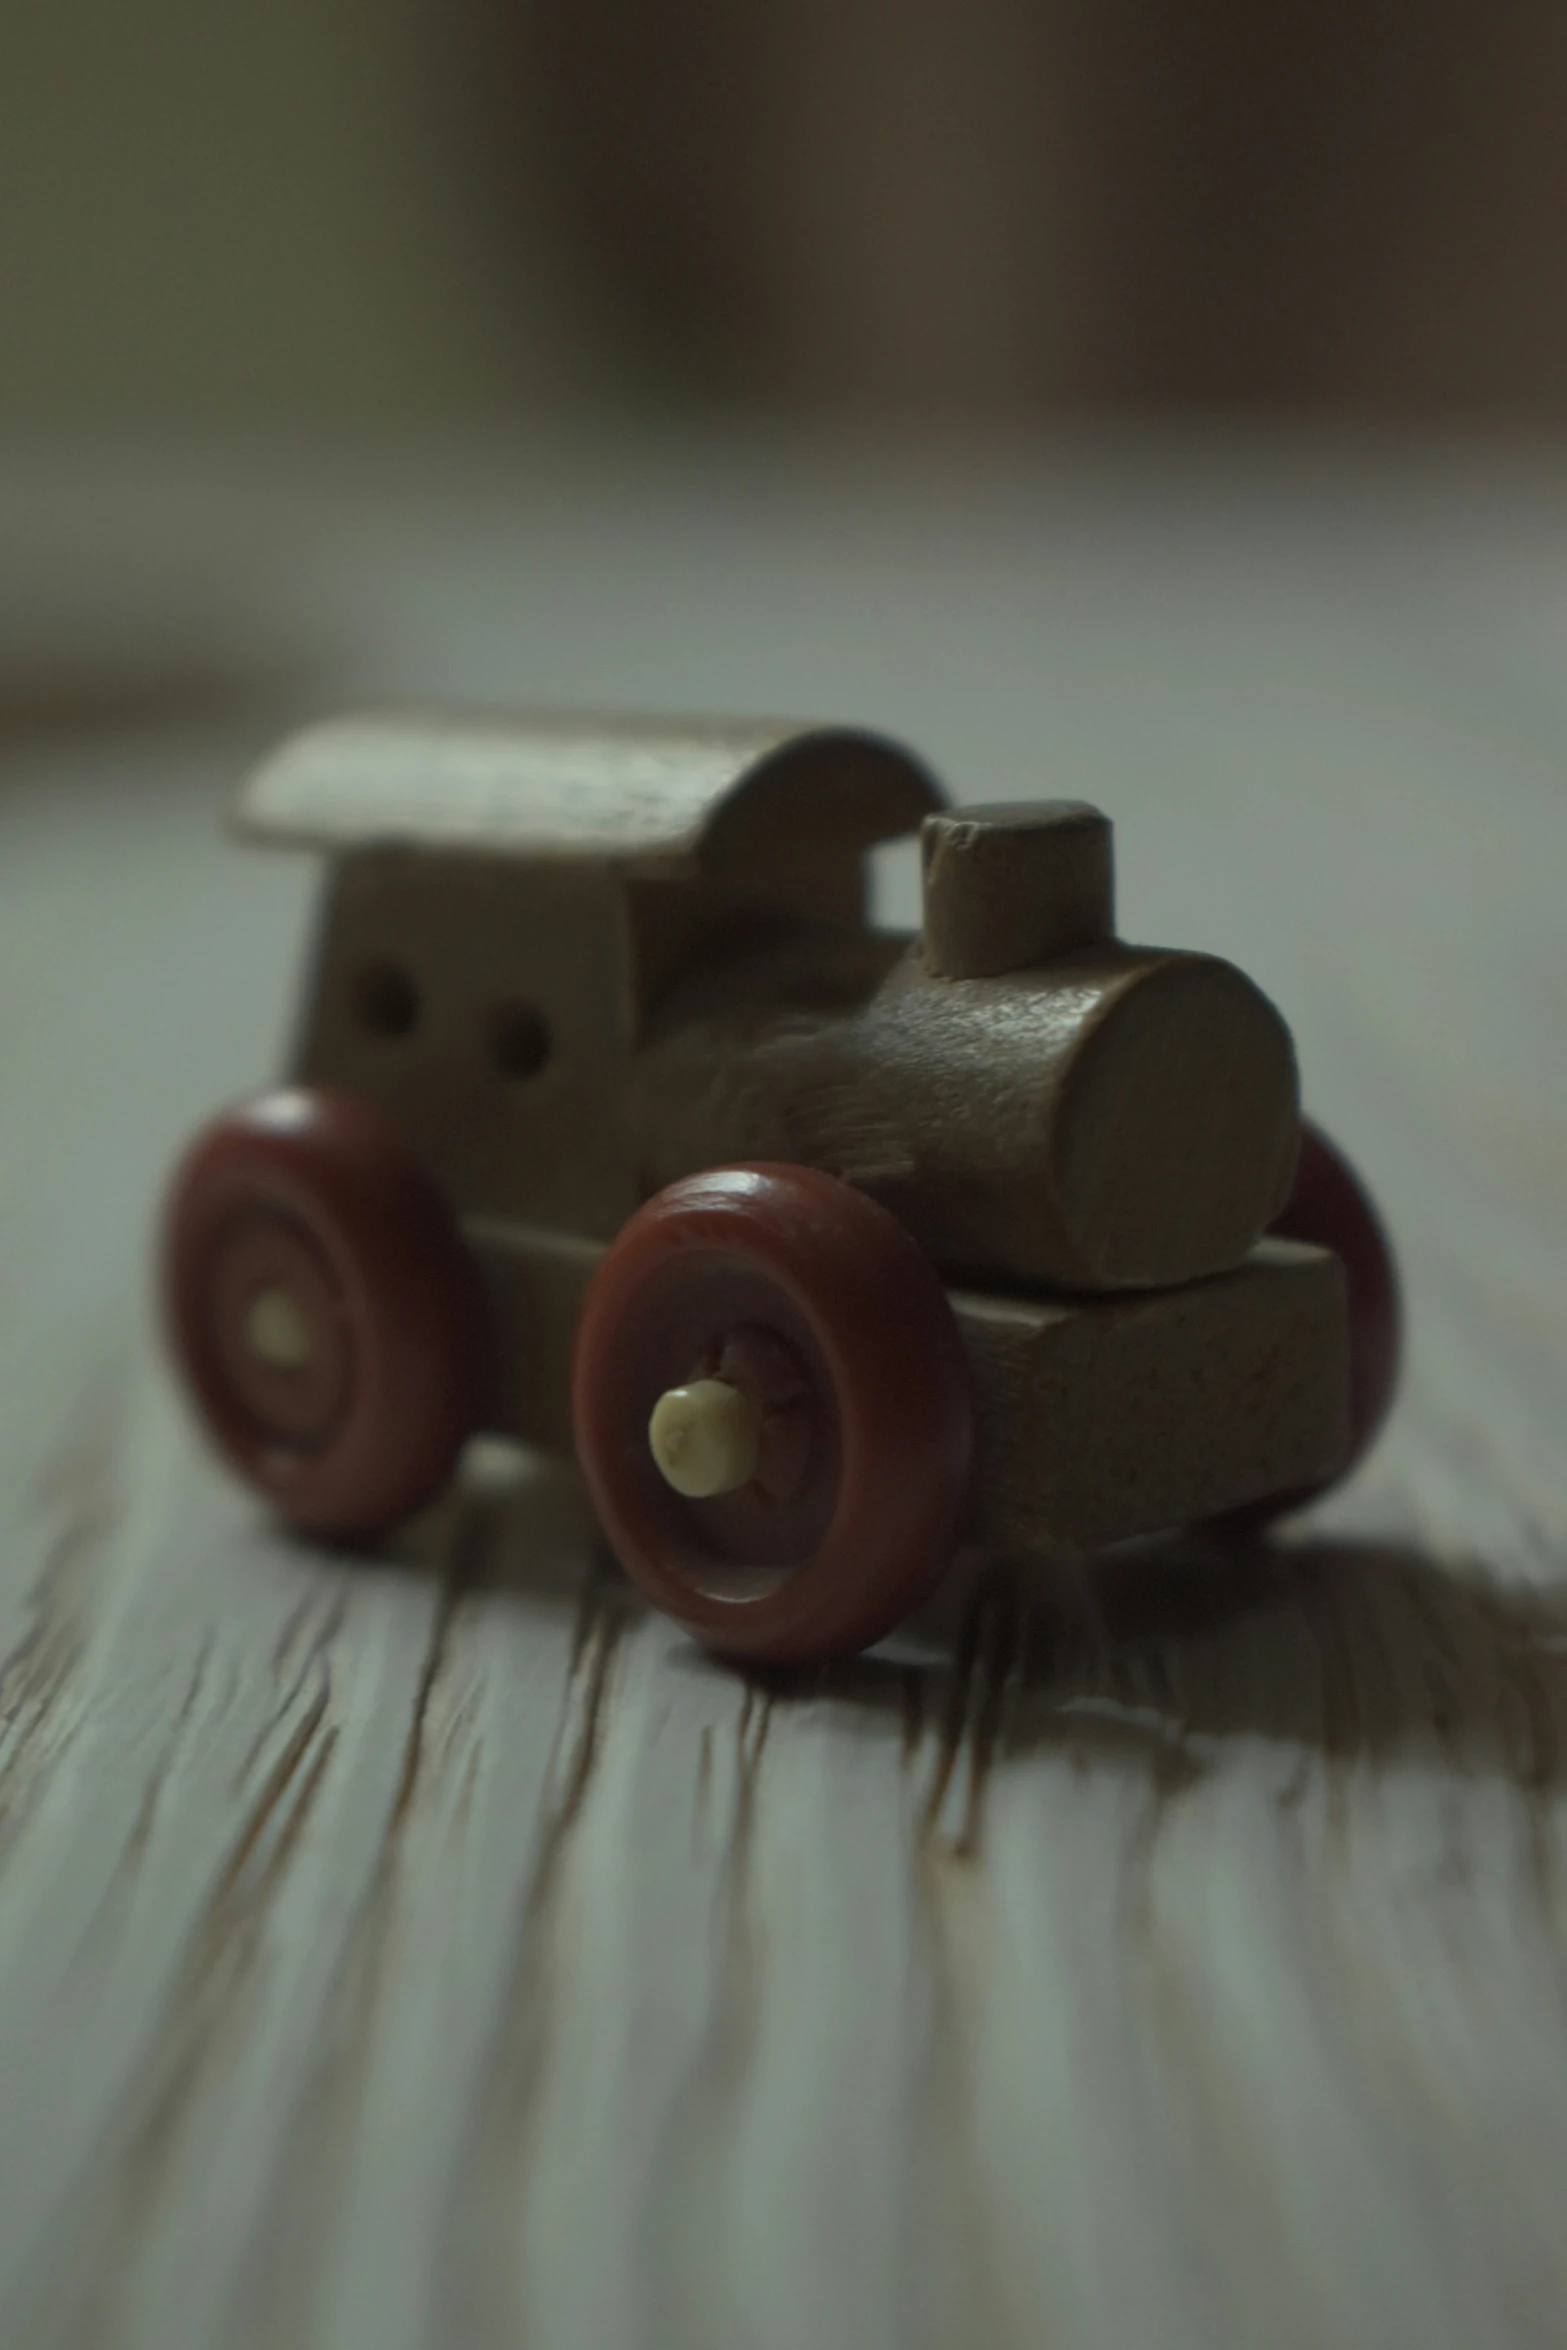 the toy car has wheels and is in very good condition